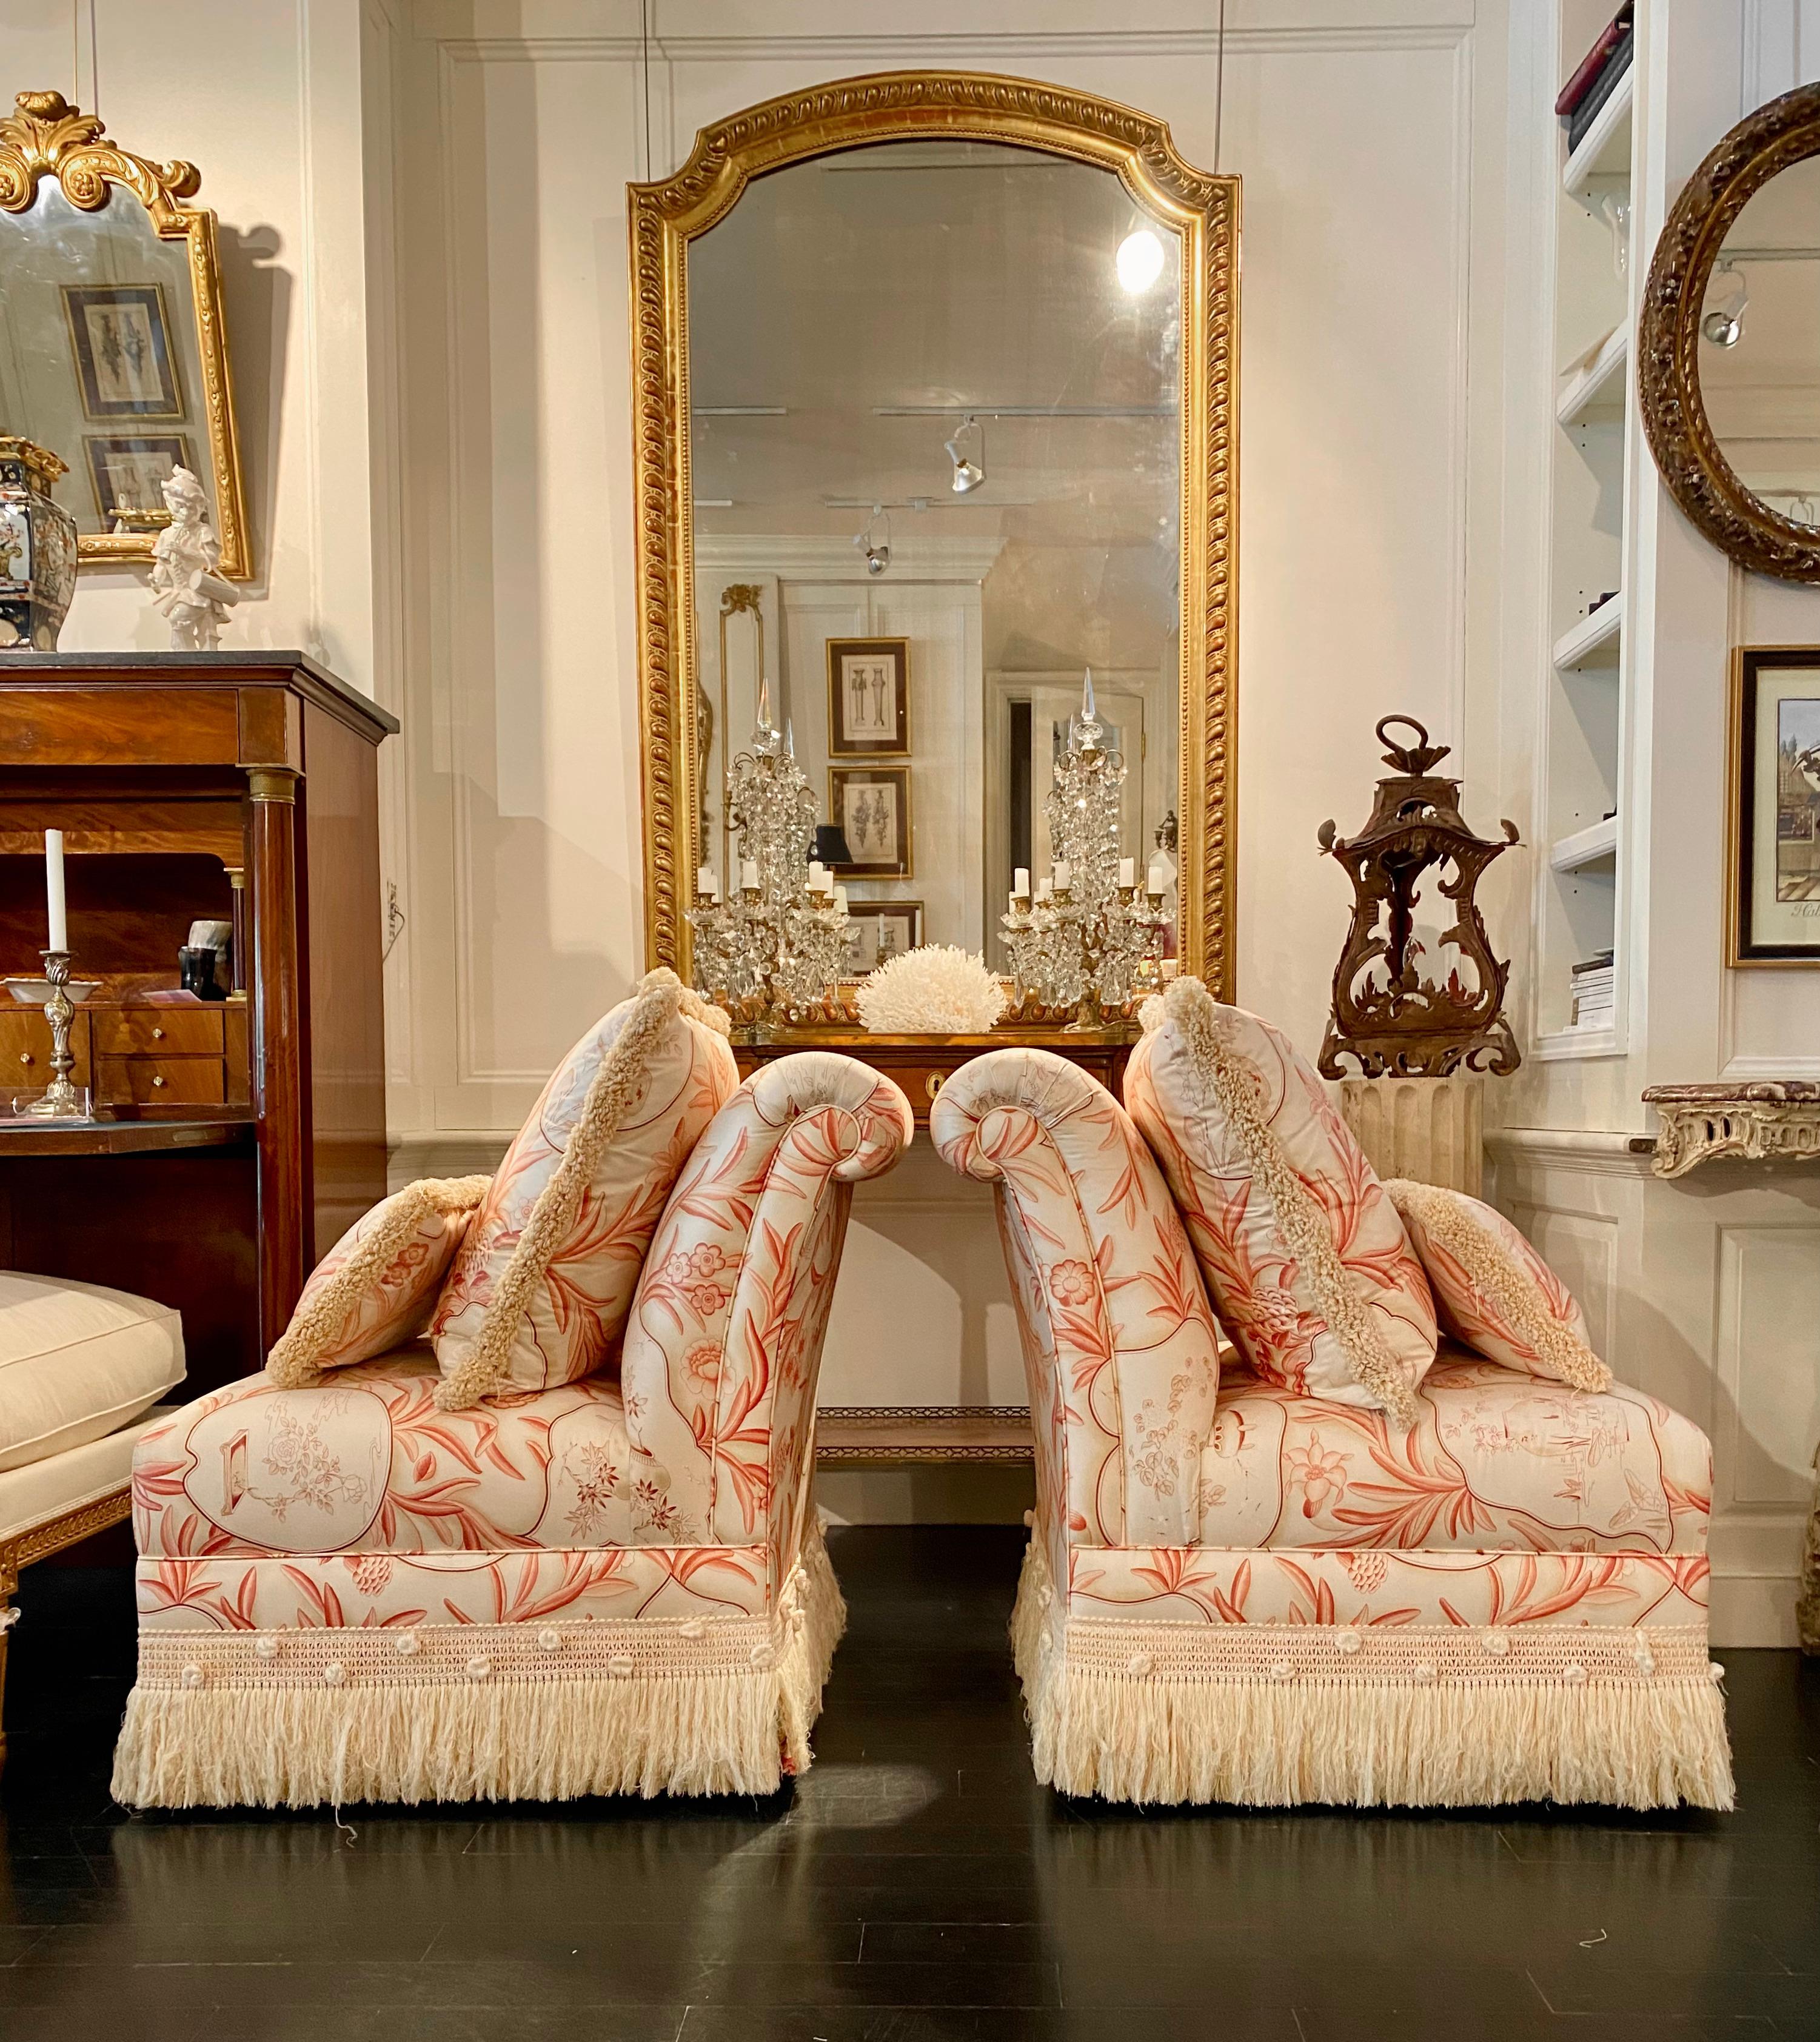 Pair of vintage Mid-Century Modern slipper chairs by Piedmont, Toile upholstery with Chinoiserie motif. Well-chosen passementerie details, with four extra matching pillows. The élan of Hollywood Regency with a nod to Billy Baldwin chic.
 